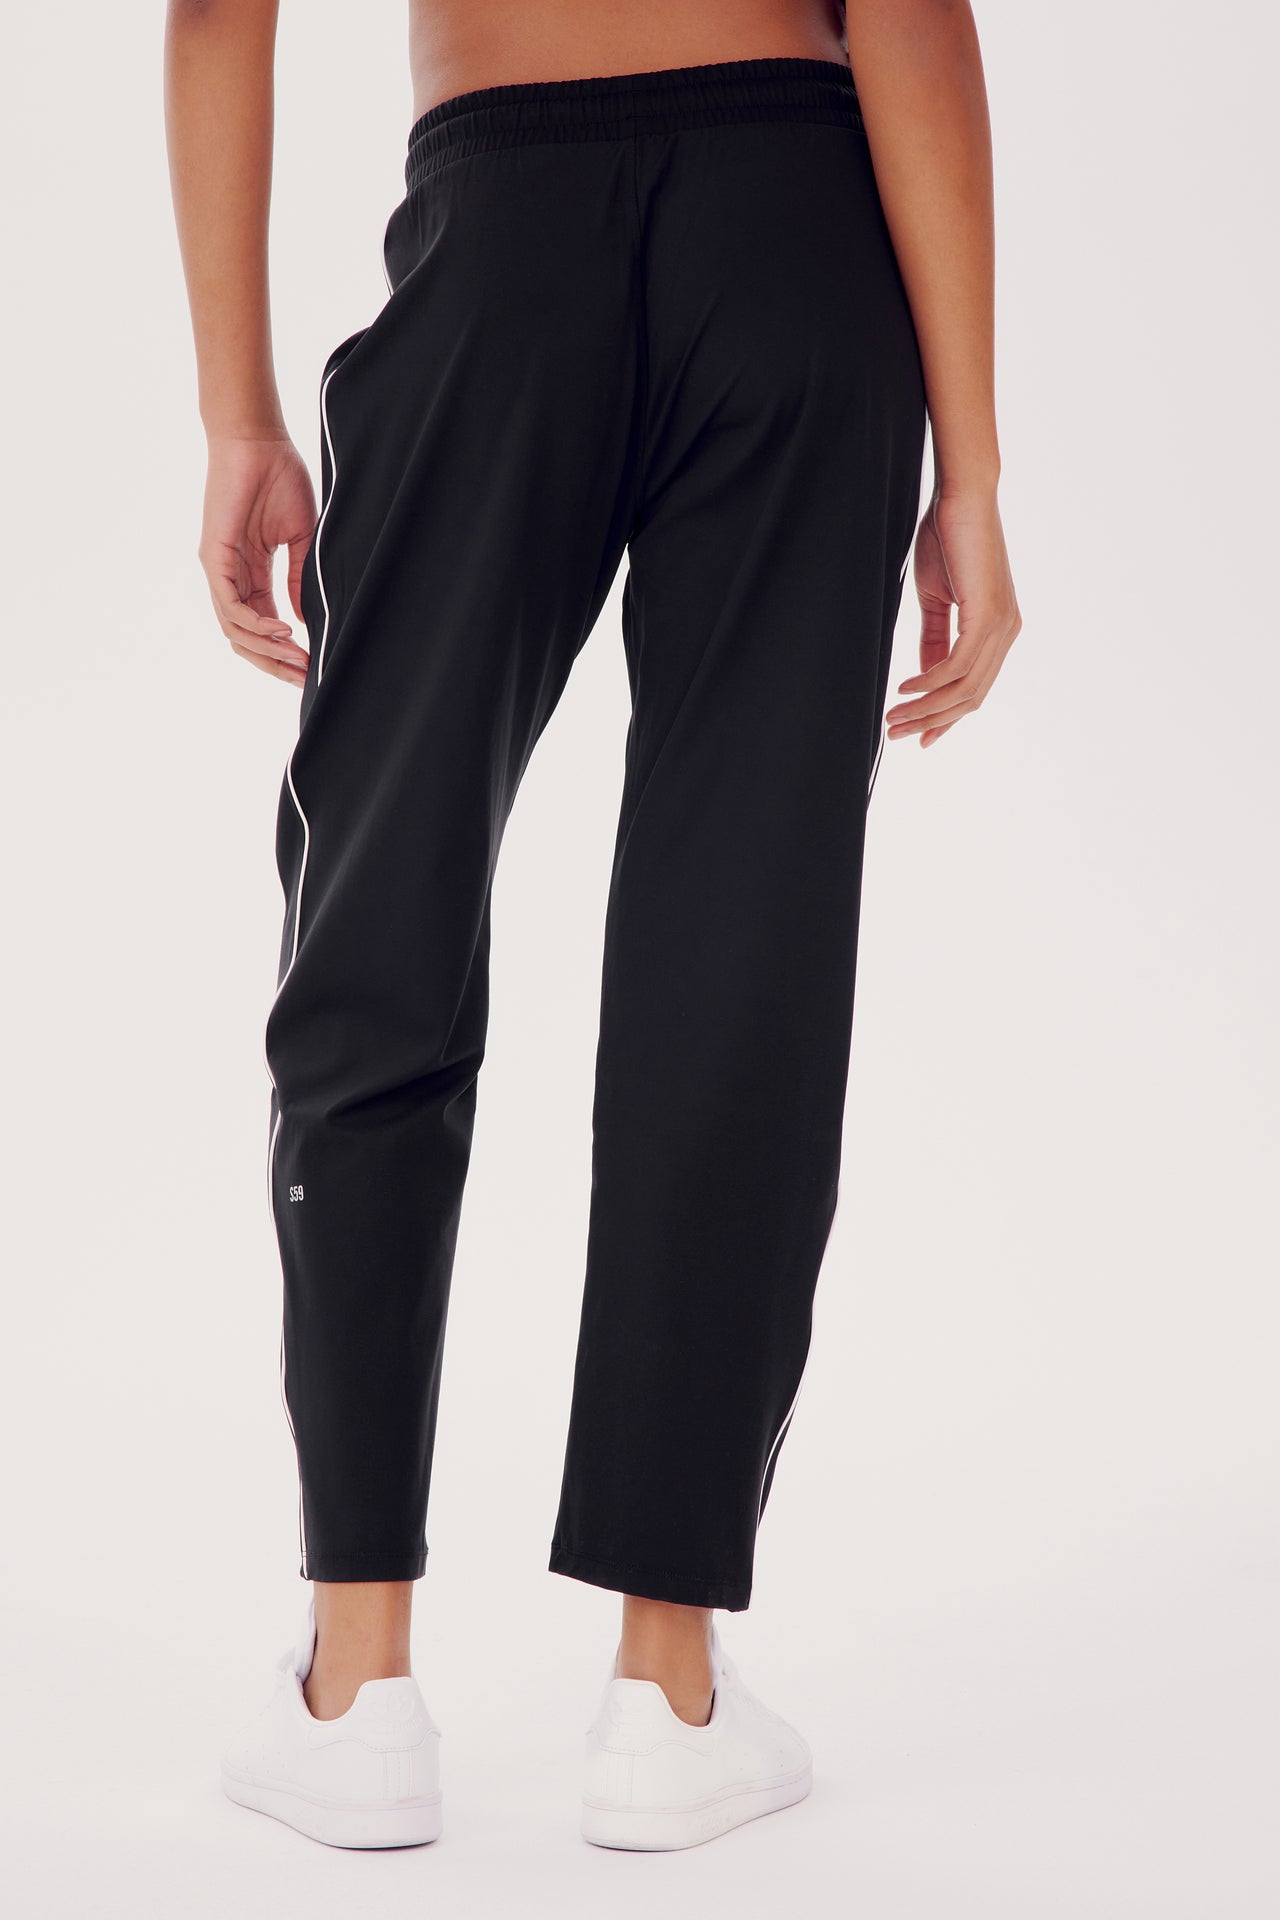 A person wearing SPLITS59 Lucy Rigor Pant W/Piping in Black with a white stripe down the side and white sneakers, standing with their back turned.